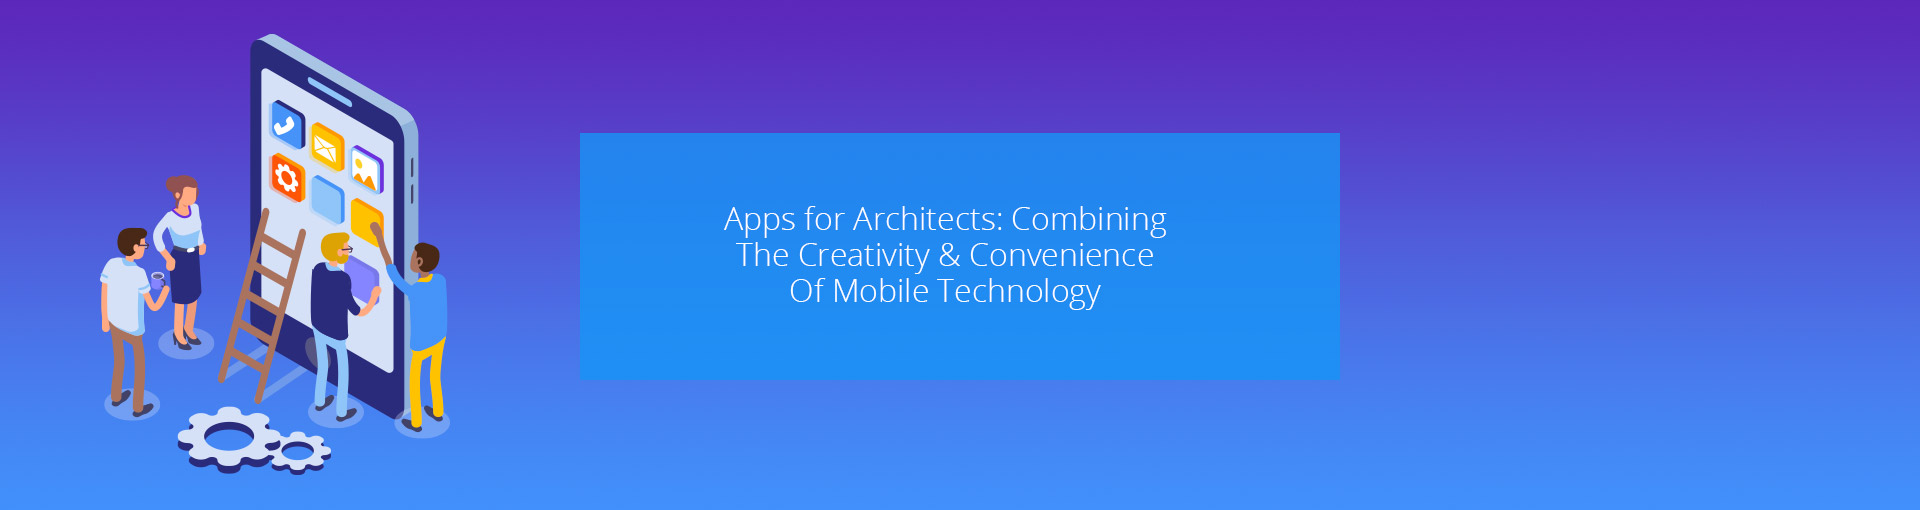 Apps for Architects: Combining The Creativity & Convenience Of Mobile Technology Featured Image